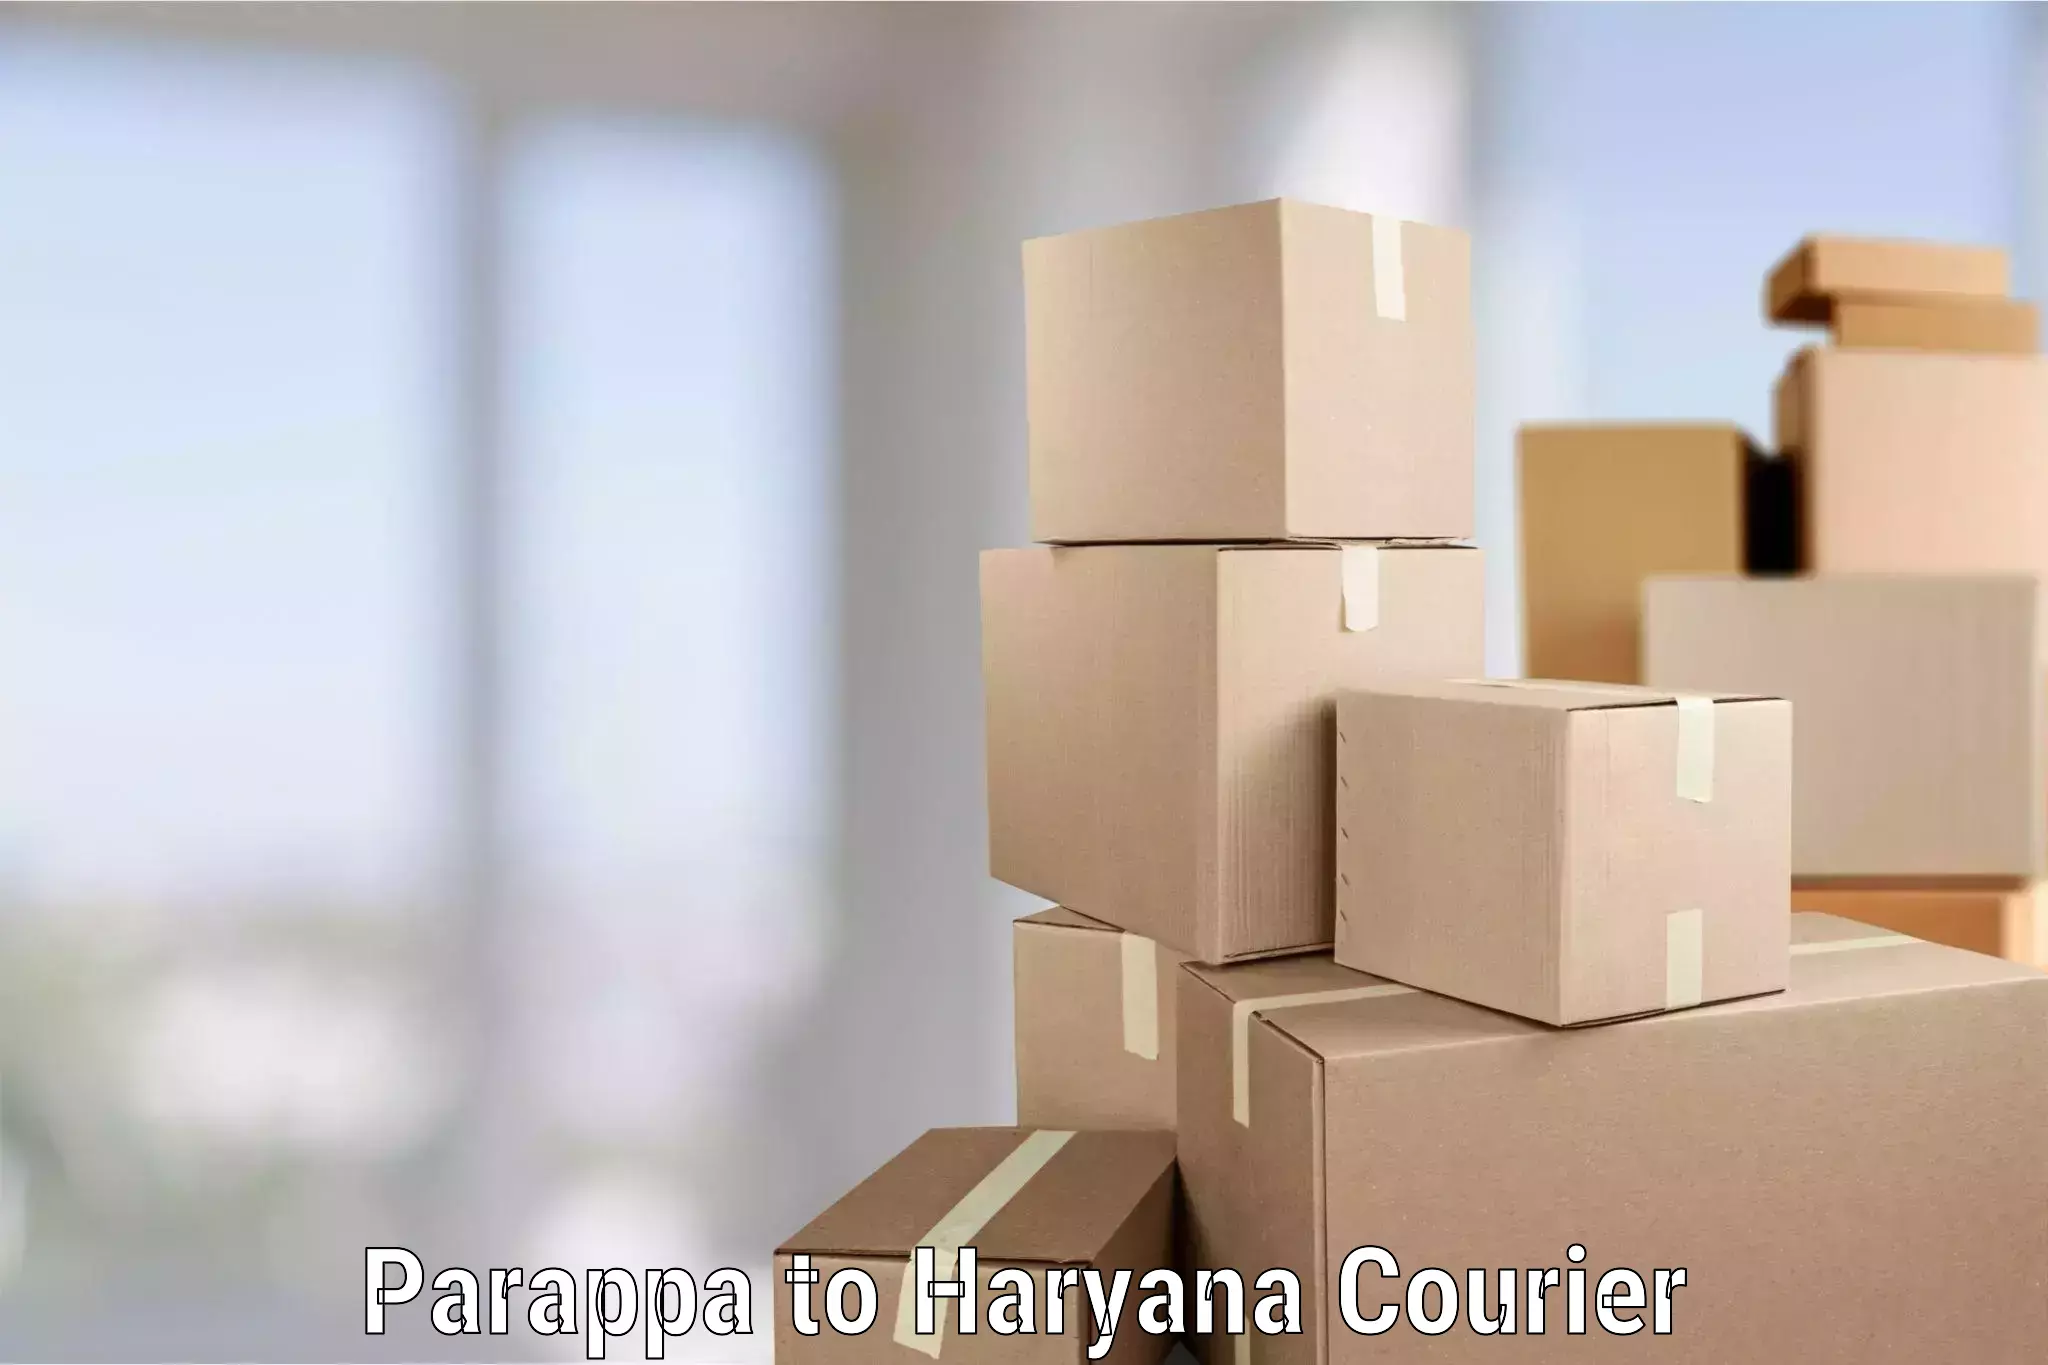 Quality relocation services Parappa to Haryana